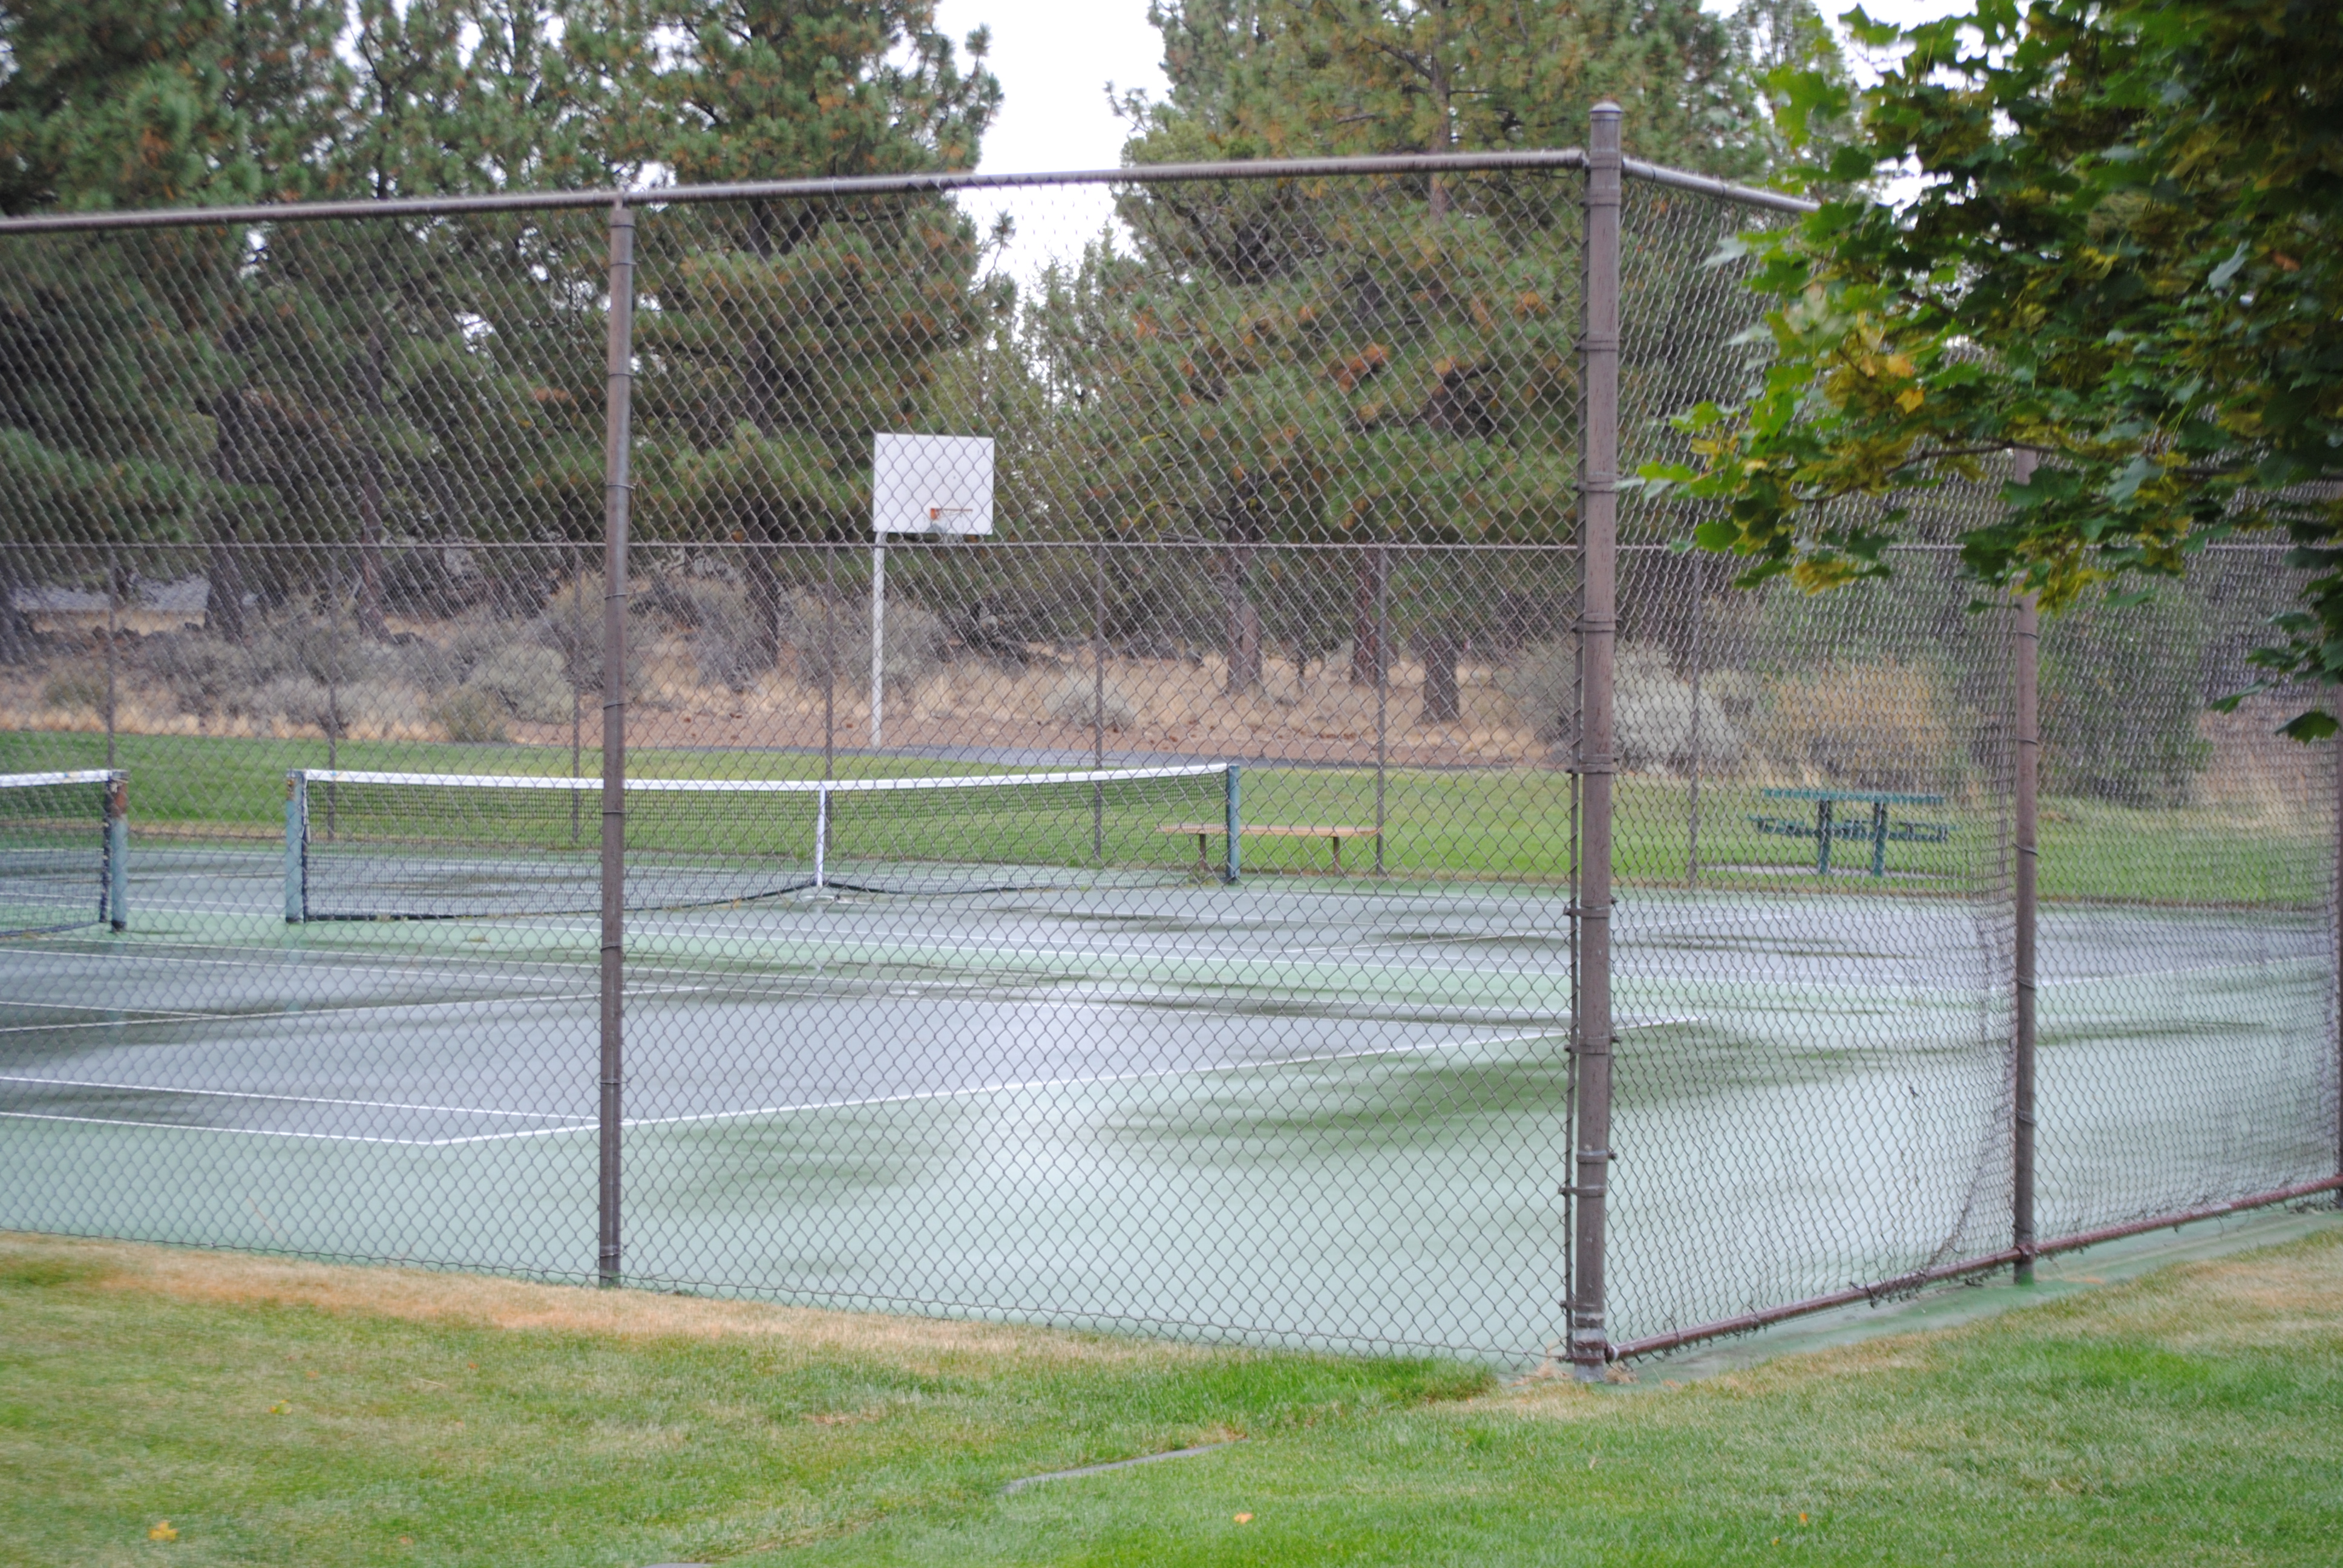 Tennis courts and basketball at Summit Park